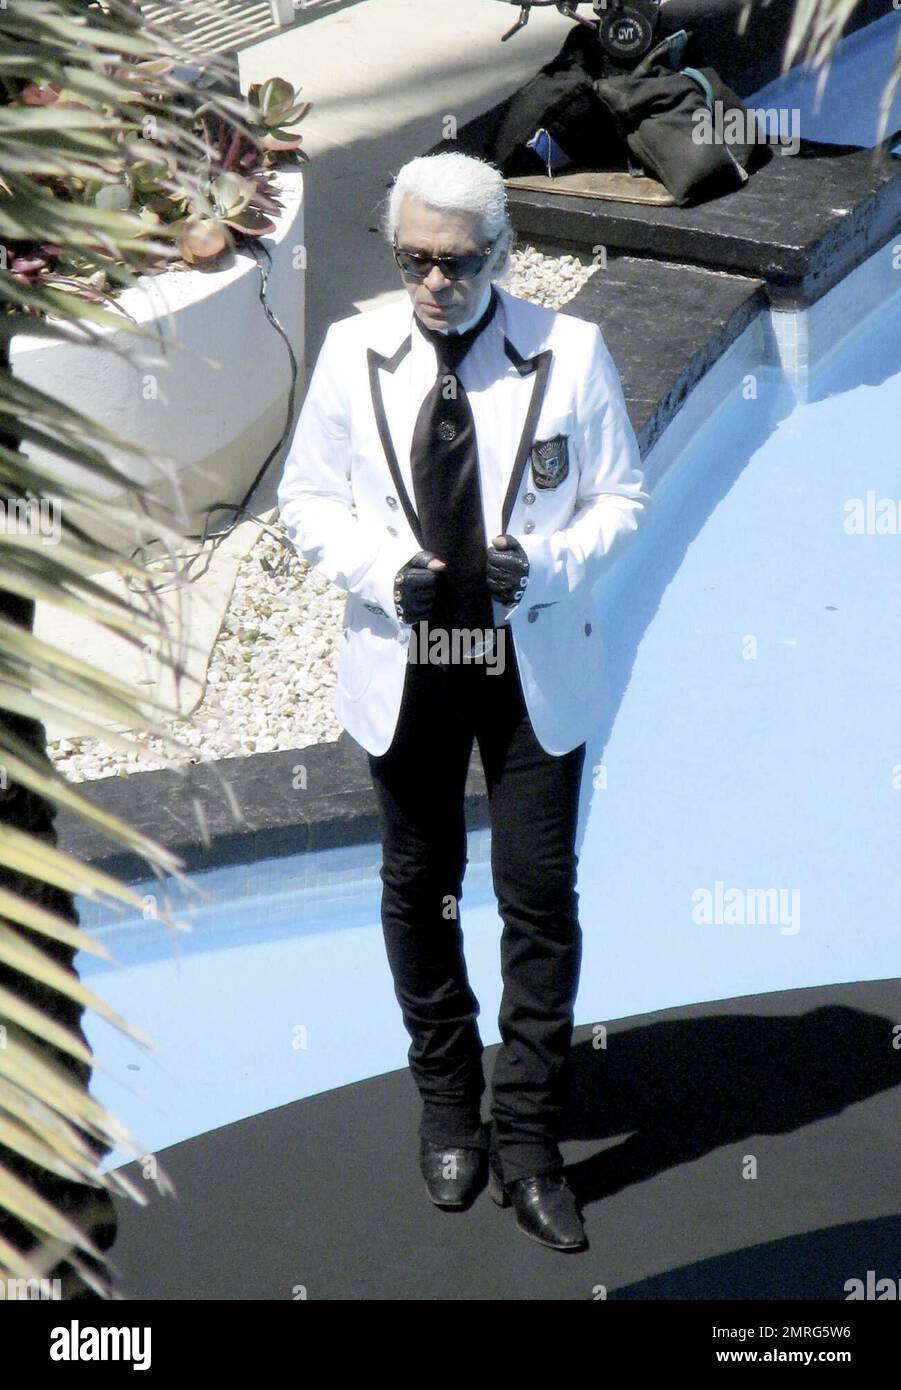 ekstremister Leopard abstrakt Exclusive!! Karl Lagerfeld oversees setup and rehearsal for the Chanel  Cruise Collection fashion show tonight at the Raleigh Hotel in Miami Beach,  FL. 5/15/08 Stock Photo - Alamy